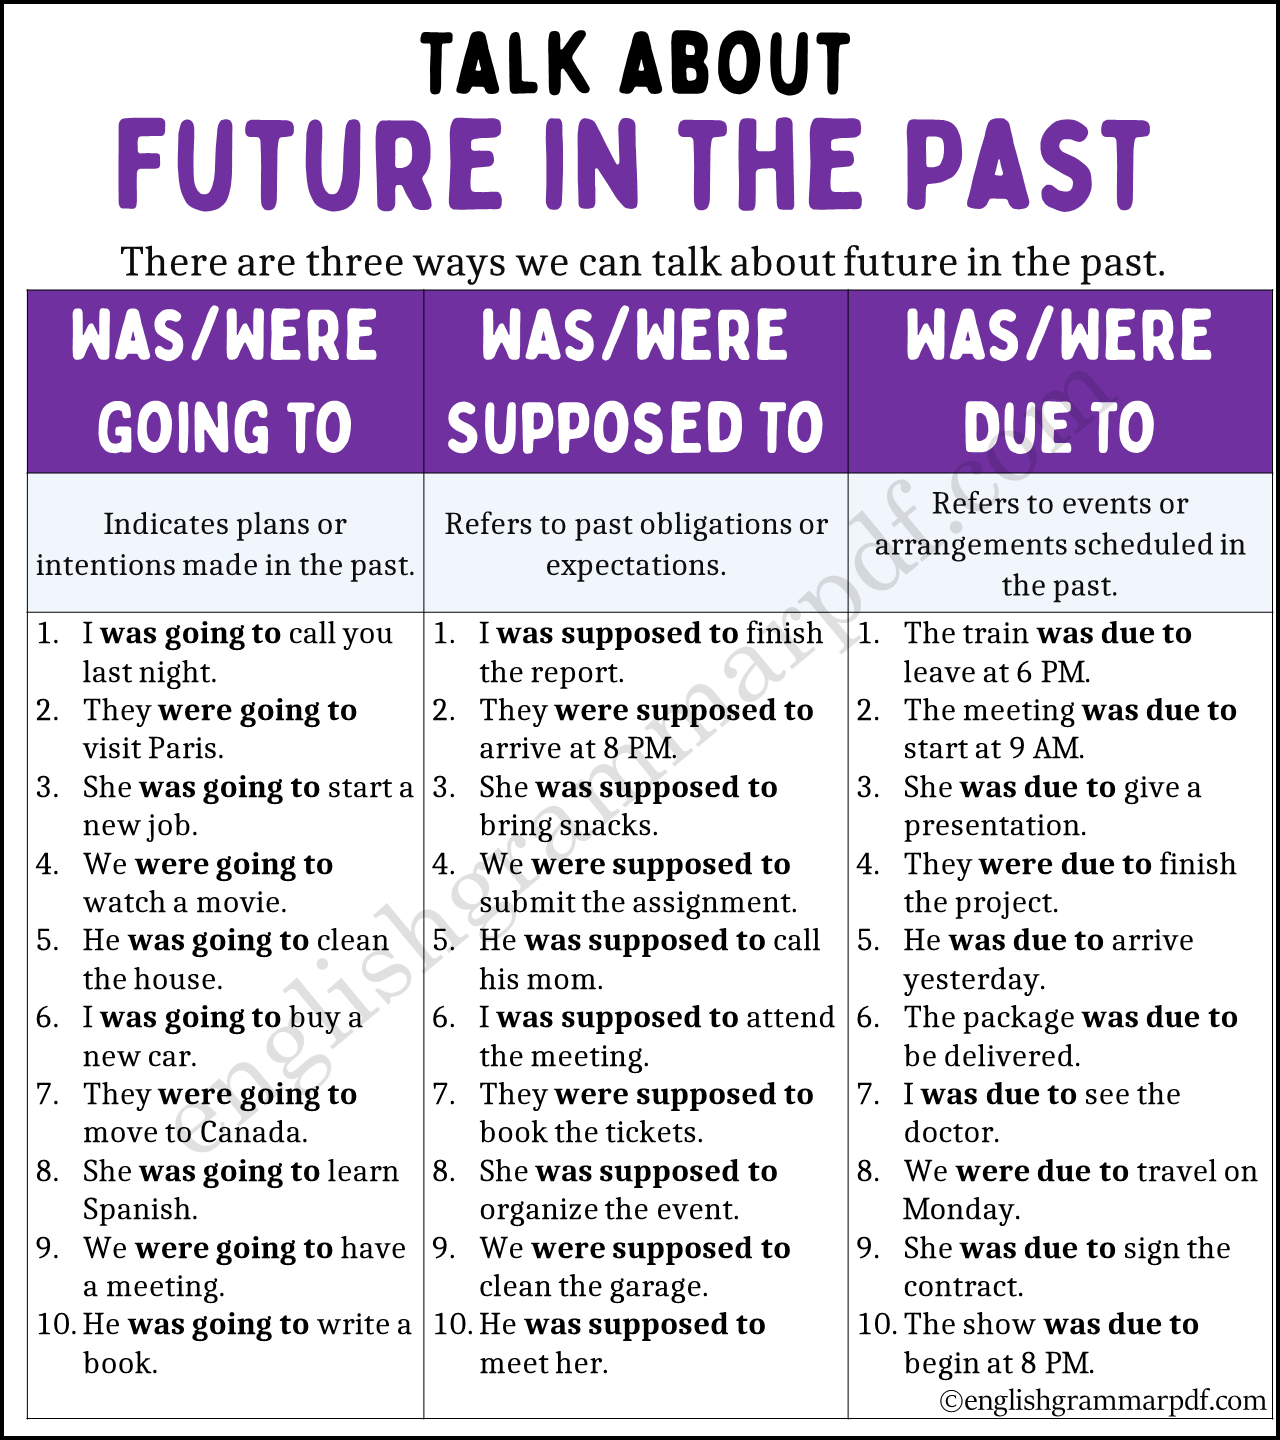 Ways to Talk about Future in the Past